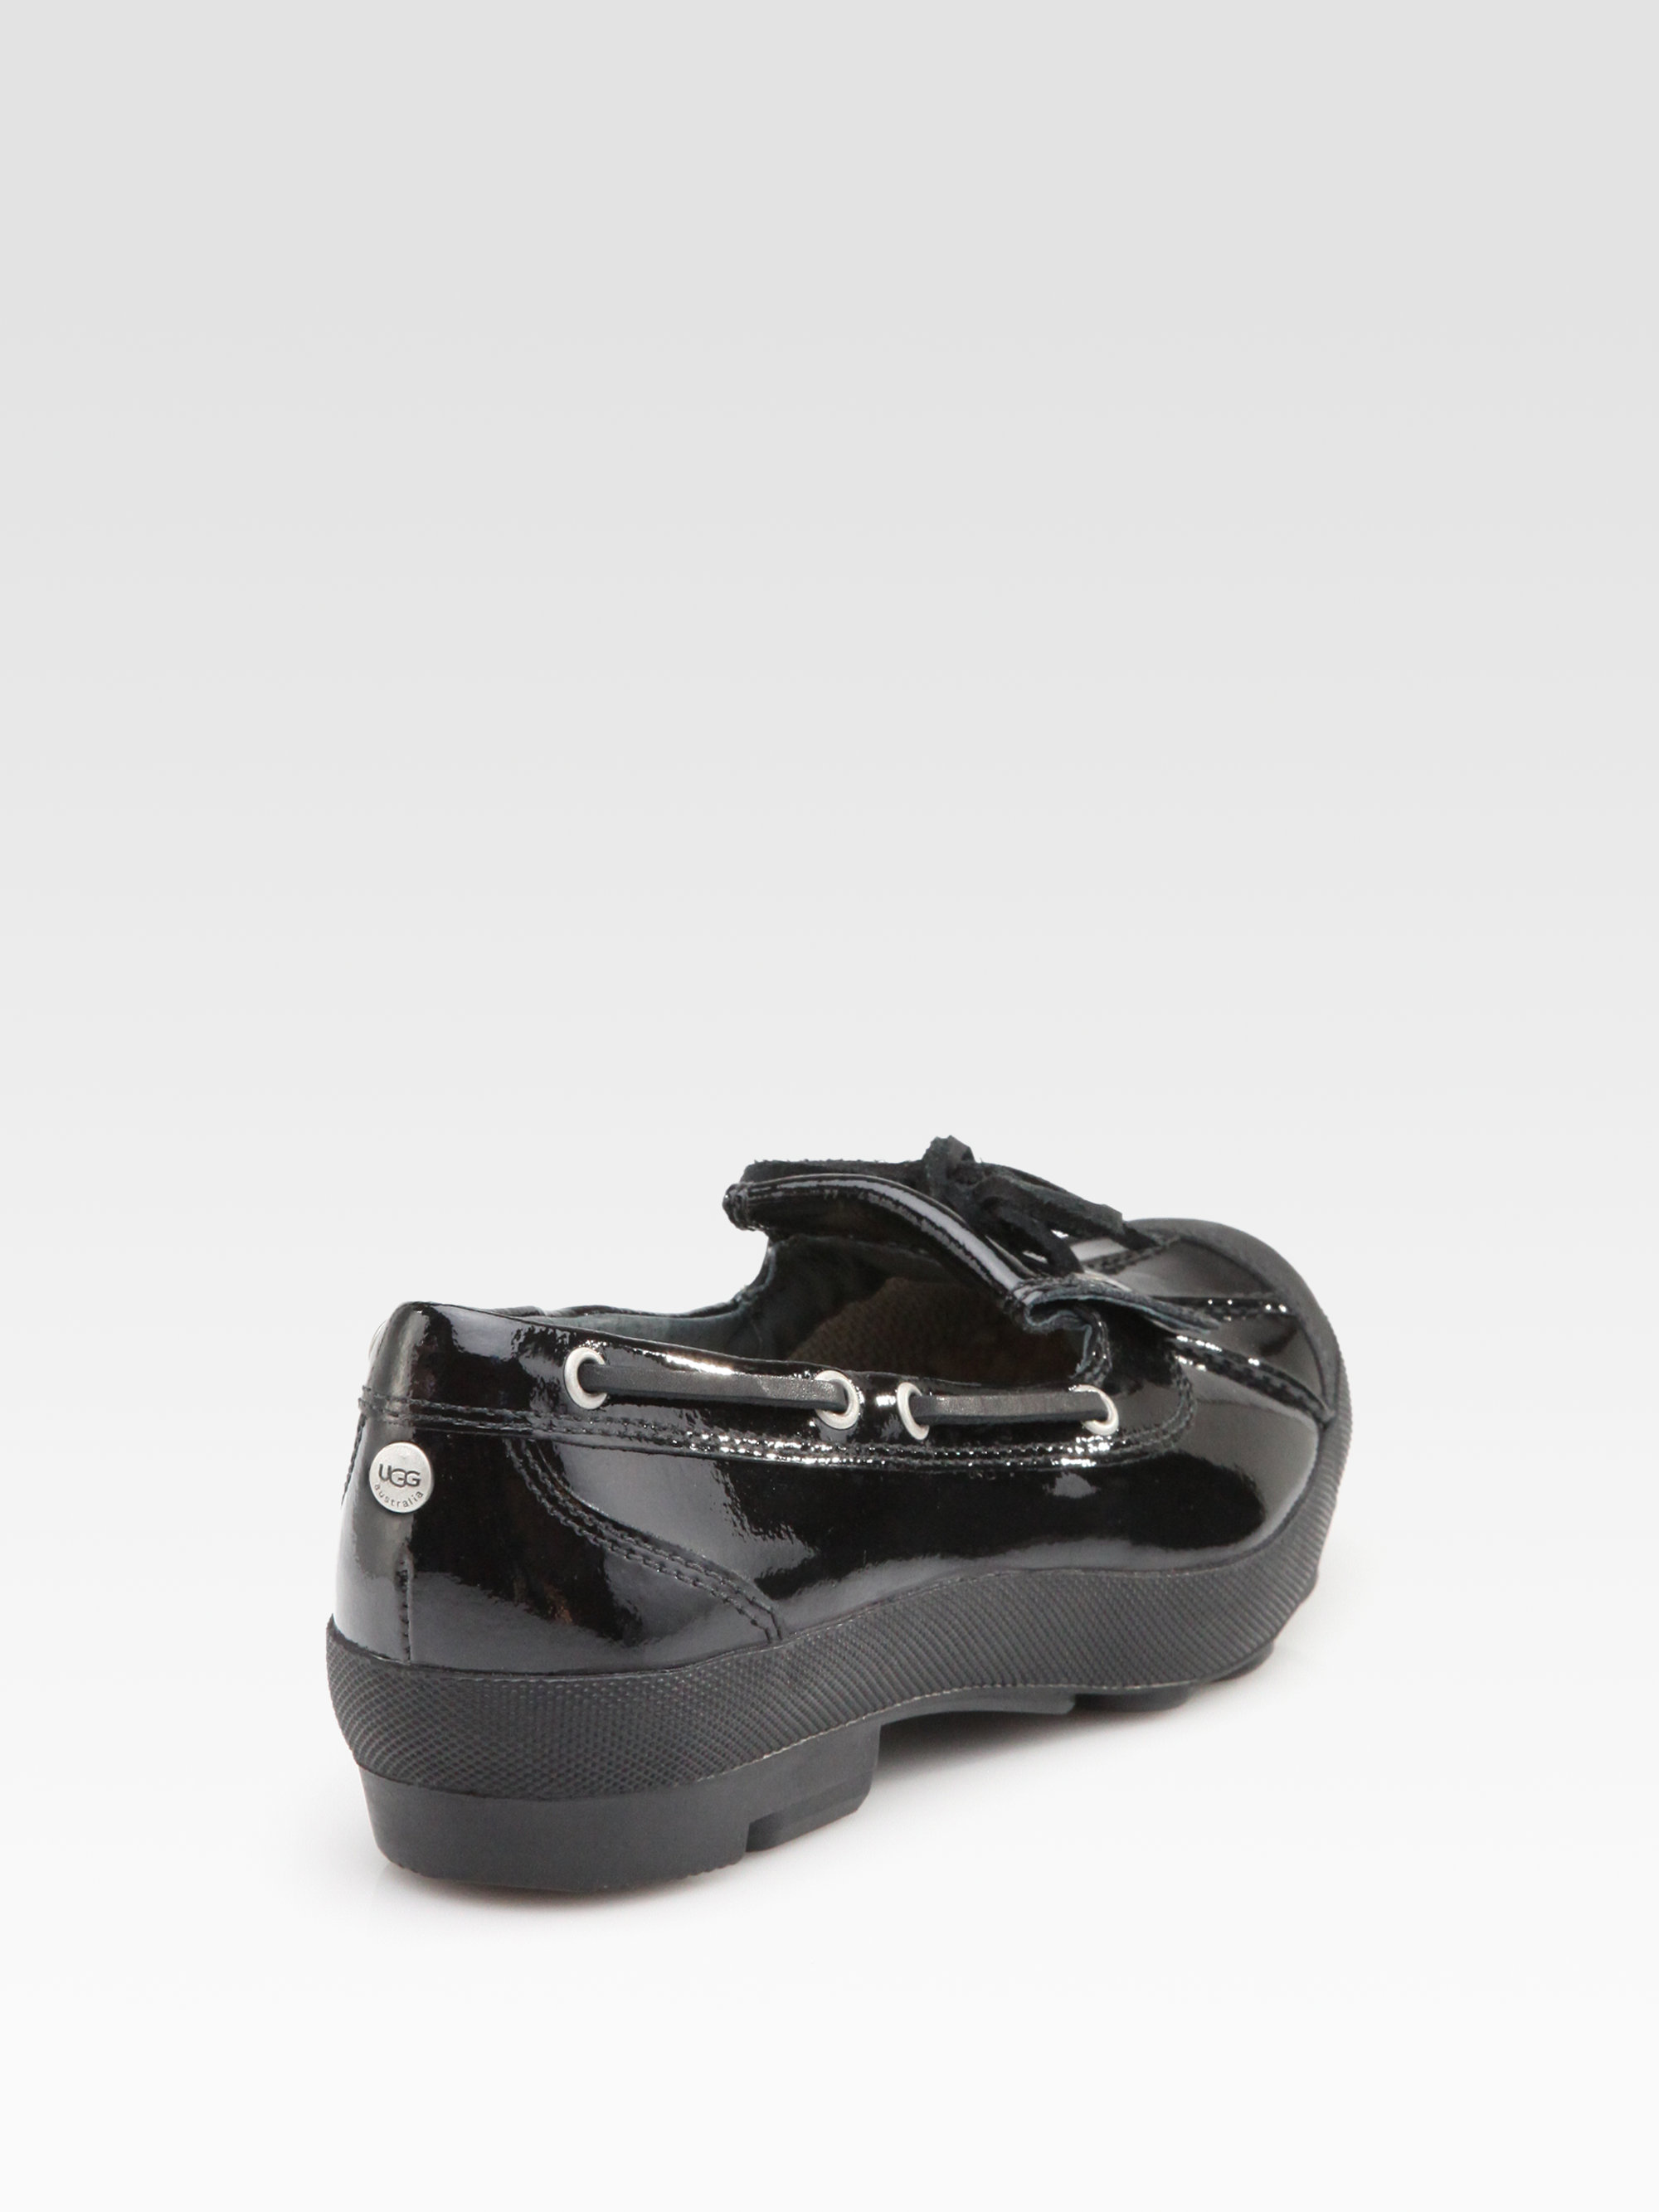 UGG Ashdale Patent Leather Rain Shoes in Black | Lyst